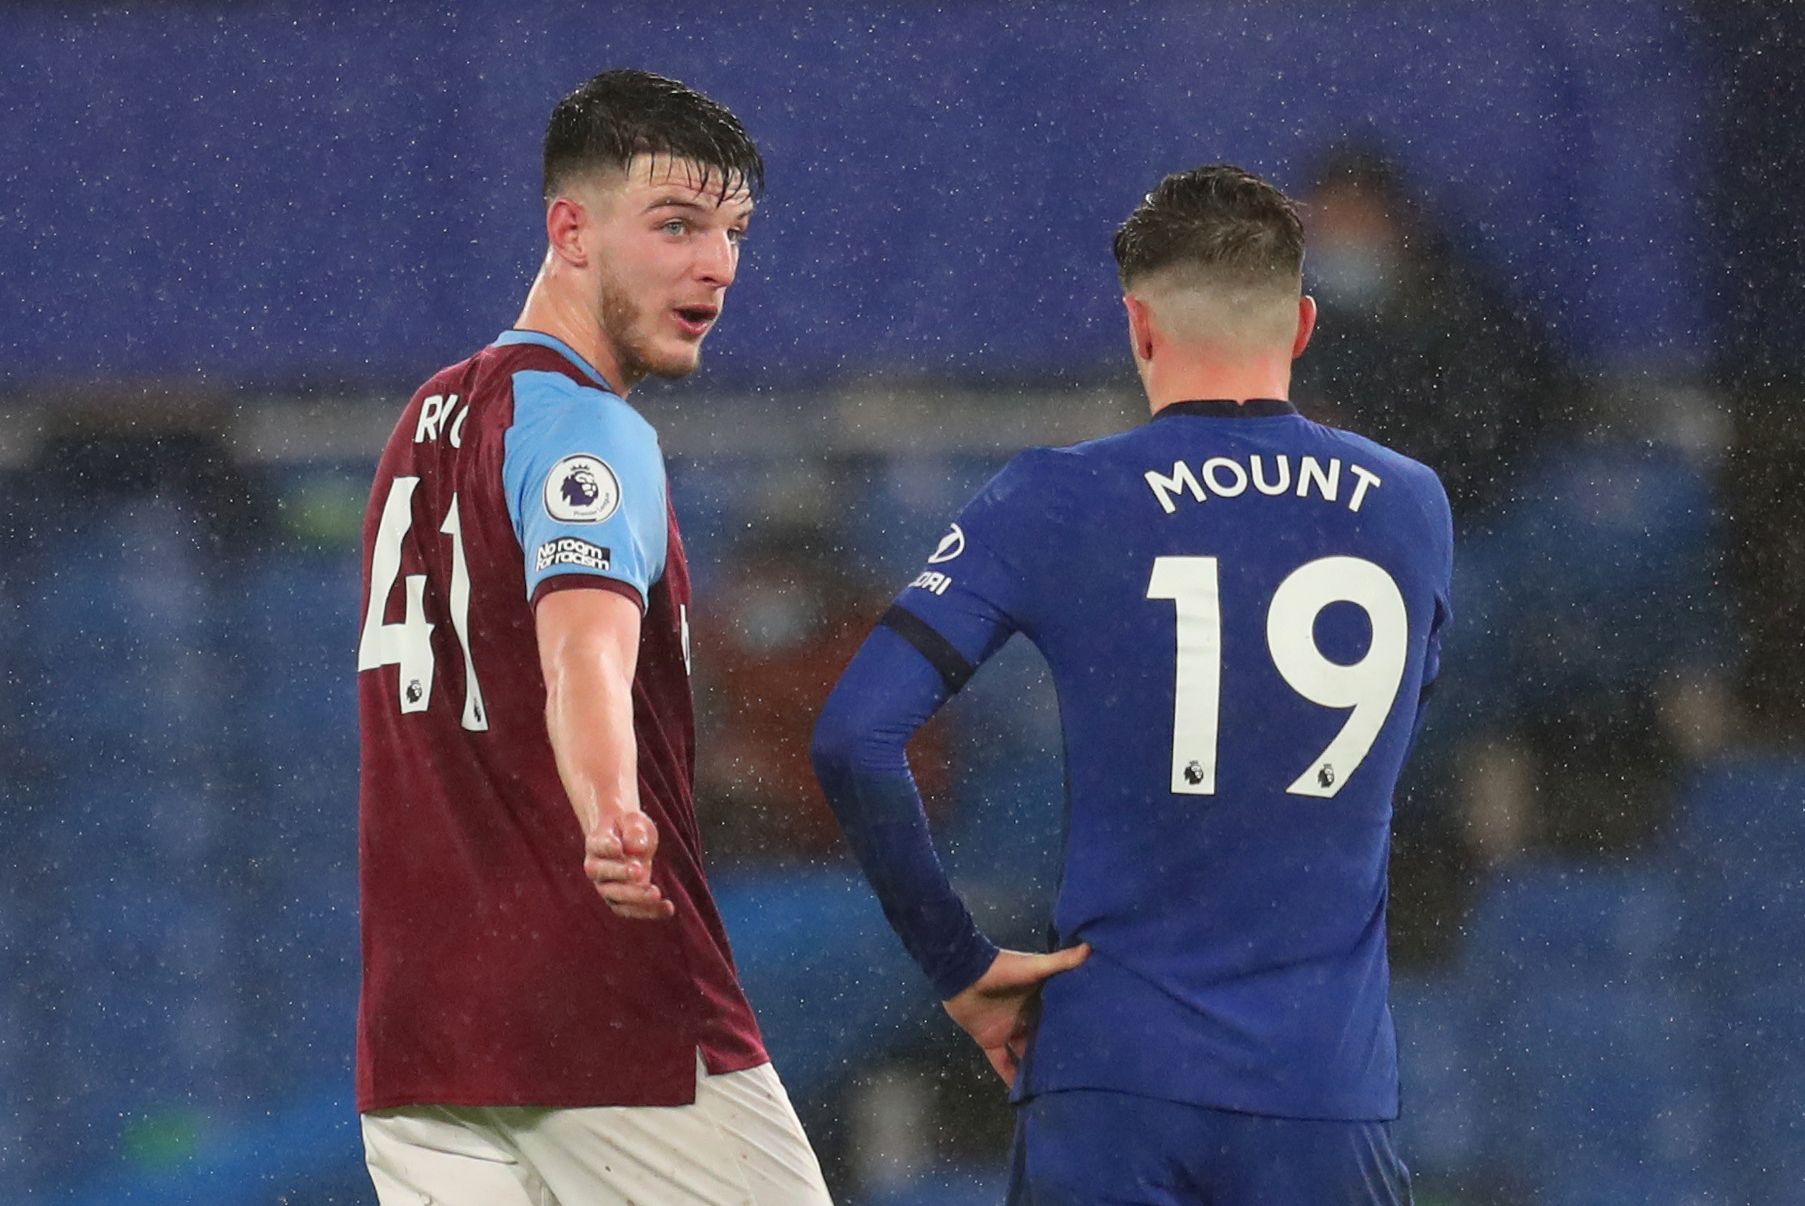 Soccer Football - Premier League - Chelsea v West Ham United - Stamford Bridge, London, Britain - December 21, 2020 Chelsea's Mason Mount with West Ham United's Declan Rice after the match Pool via REUTERS/Catherine Ivill EDITORIAL USE ONLY. No use with unauthorized audio, video, data, fixture lists, club/league logos or 'live' services. Online in-match use limited to 75 images, no video emulation. No use in betting, games or single club /league/player publications.  Please contact your account 